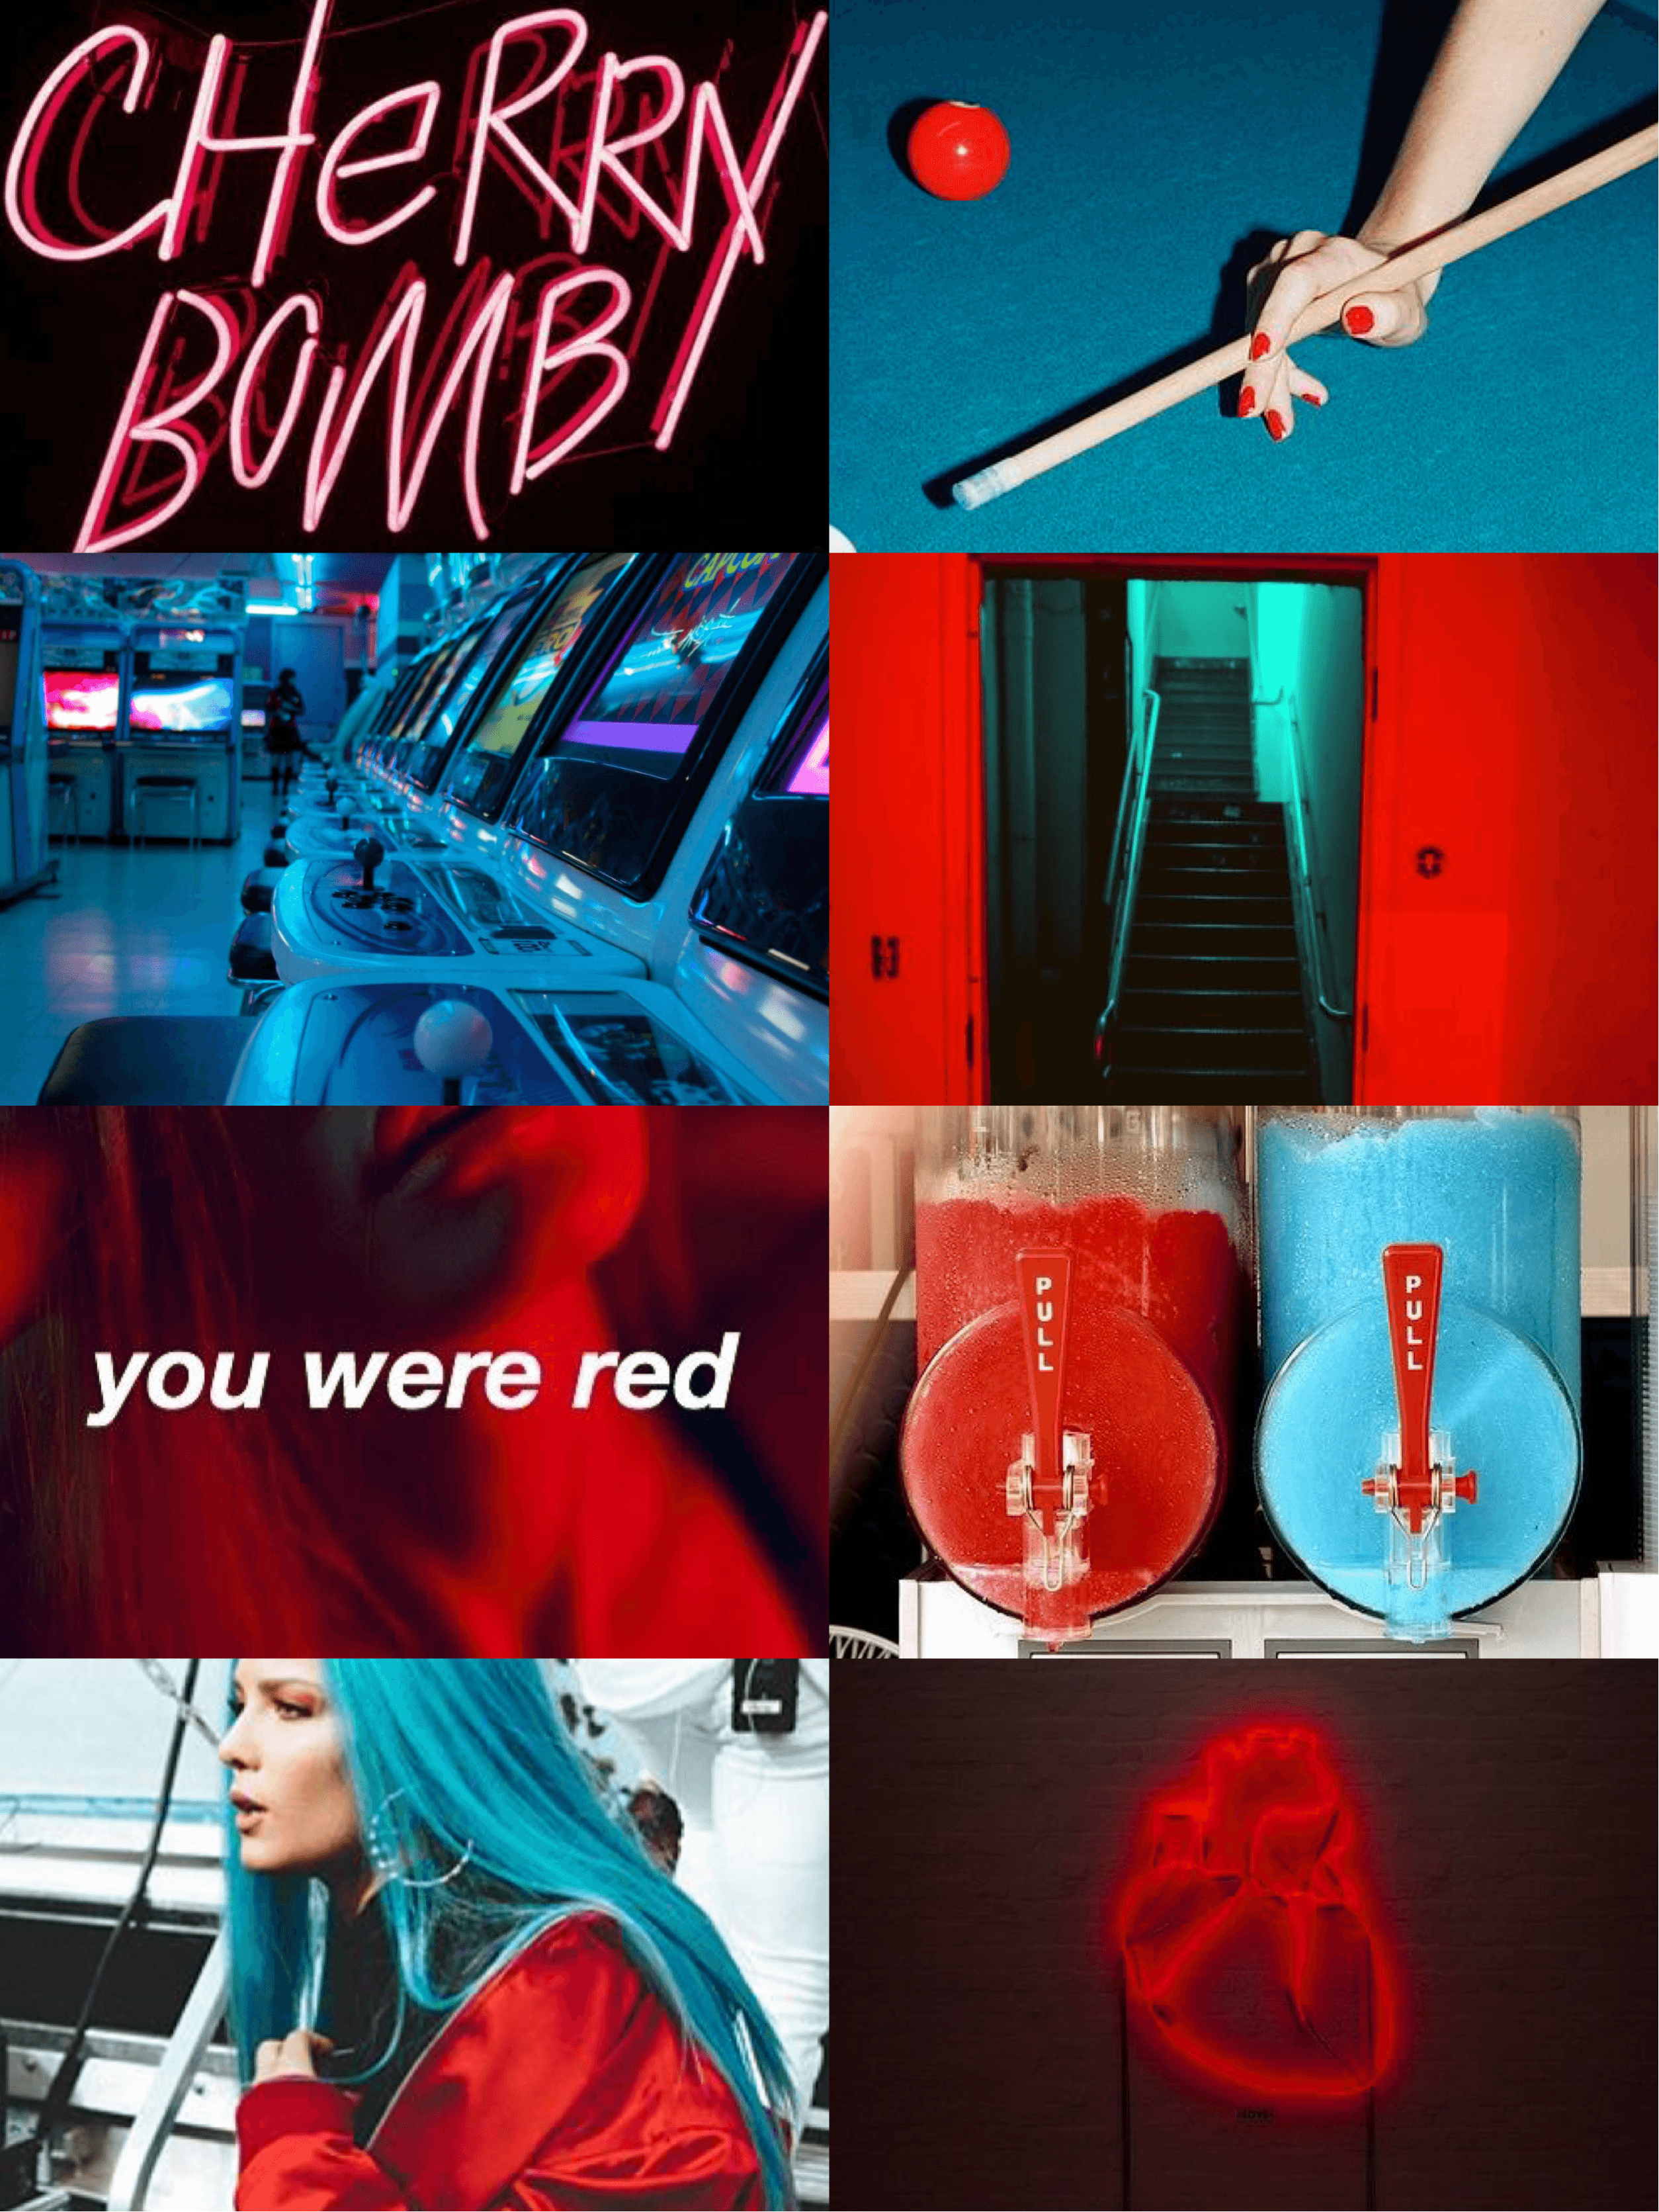 Red aesthetic, neon aesthetic, cherry bomb, you were red, red and blue, red heart - Neon red